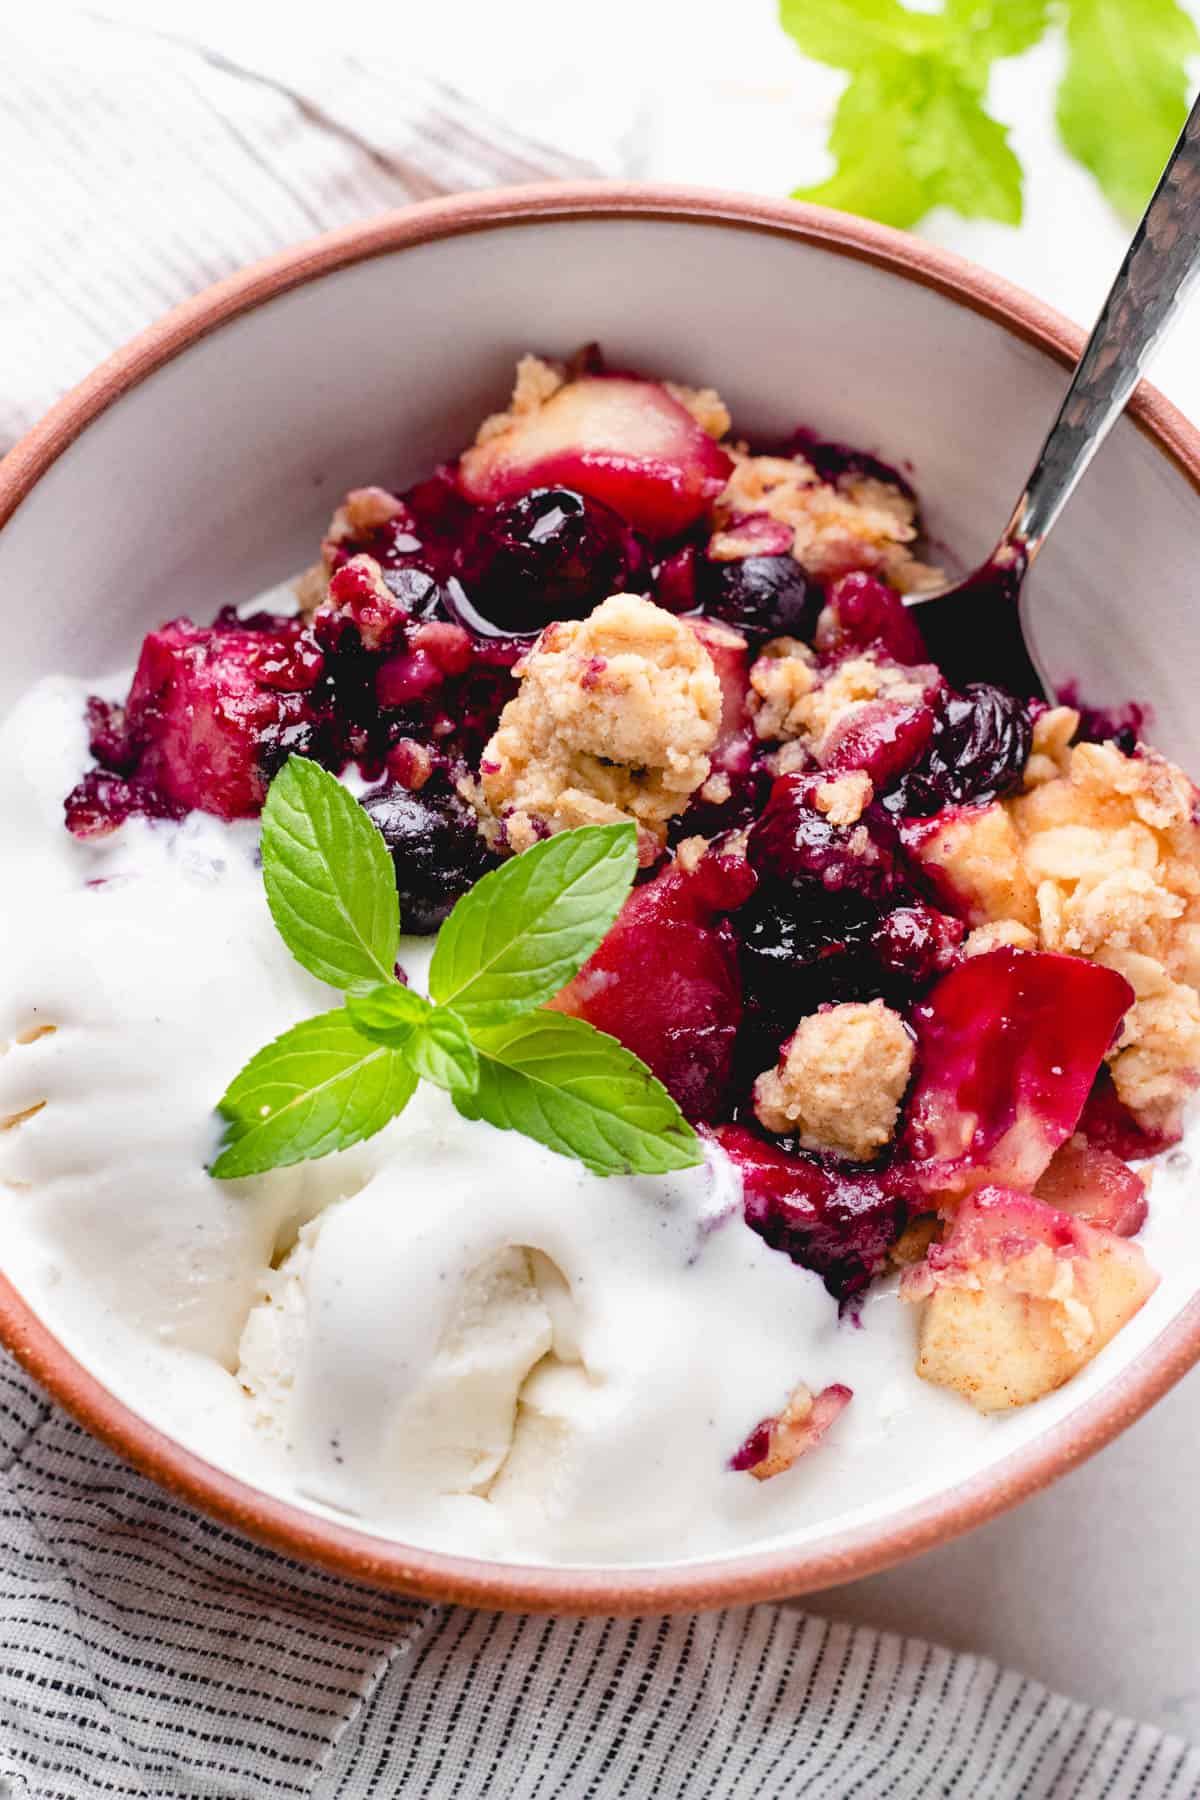 Apple and Blueberry Crumble with a spoon of ice cream and mint leaves in a bowl.